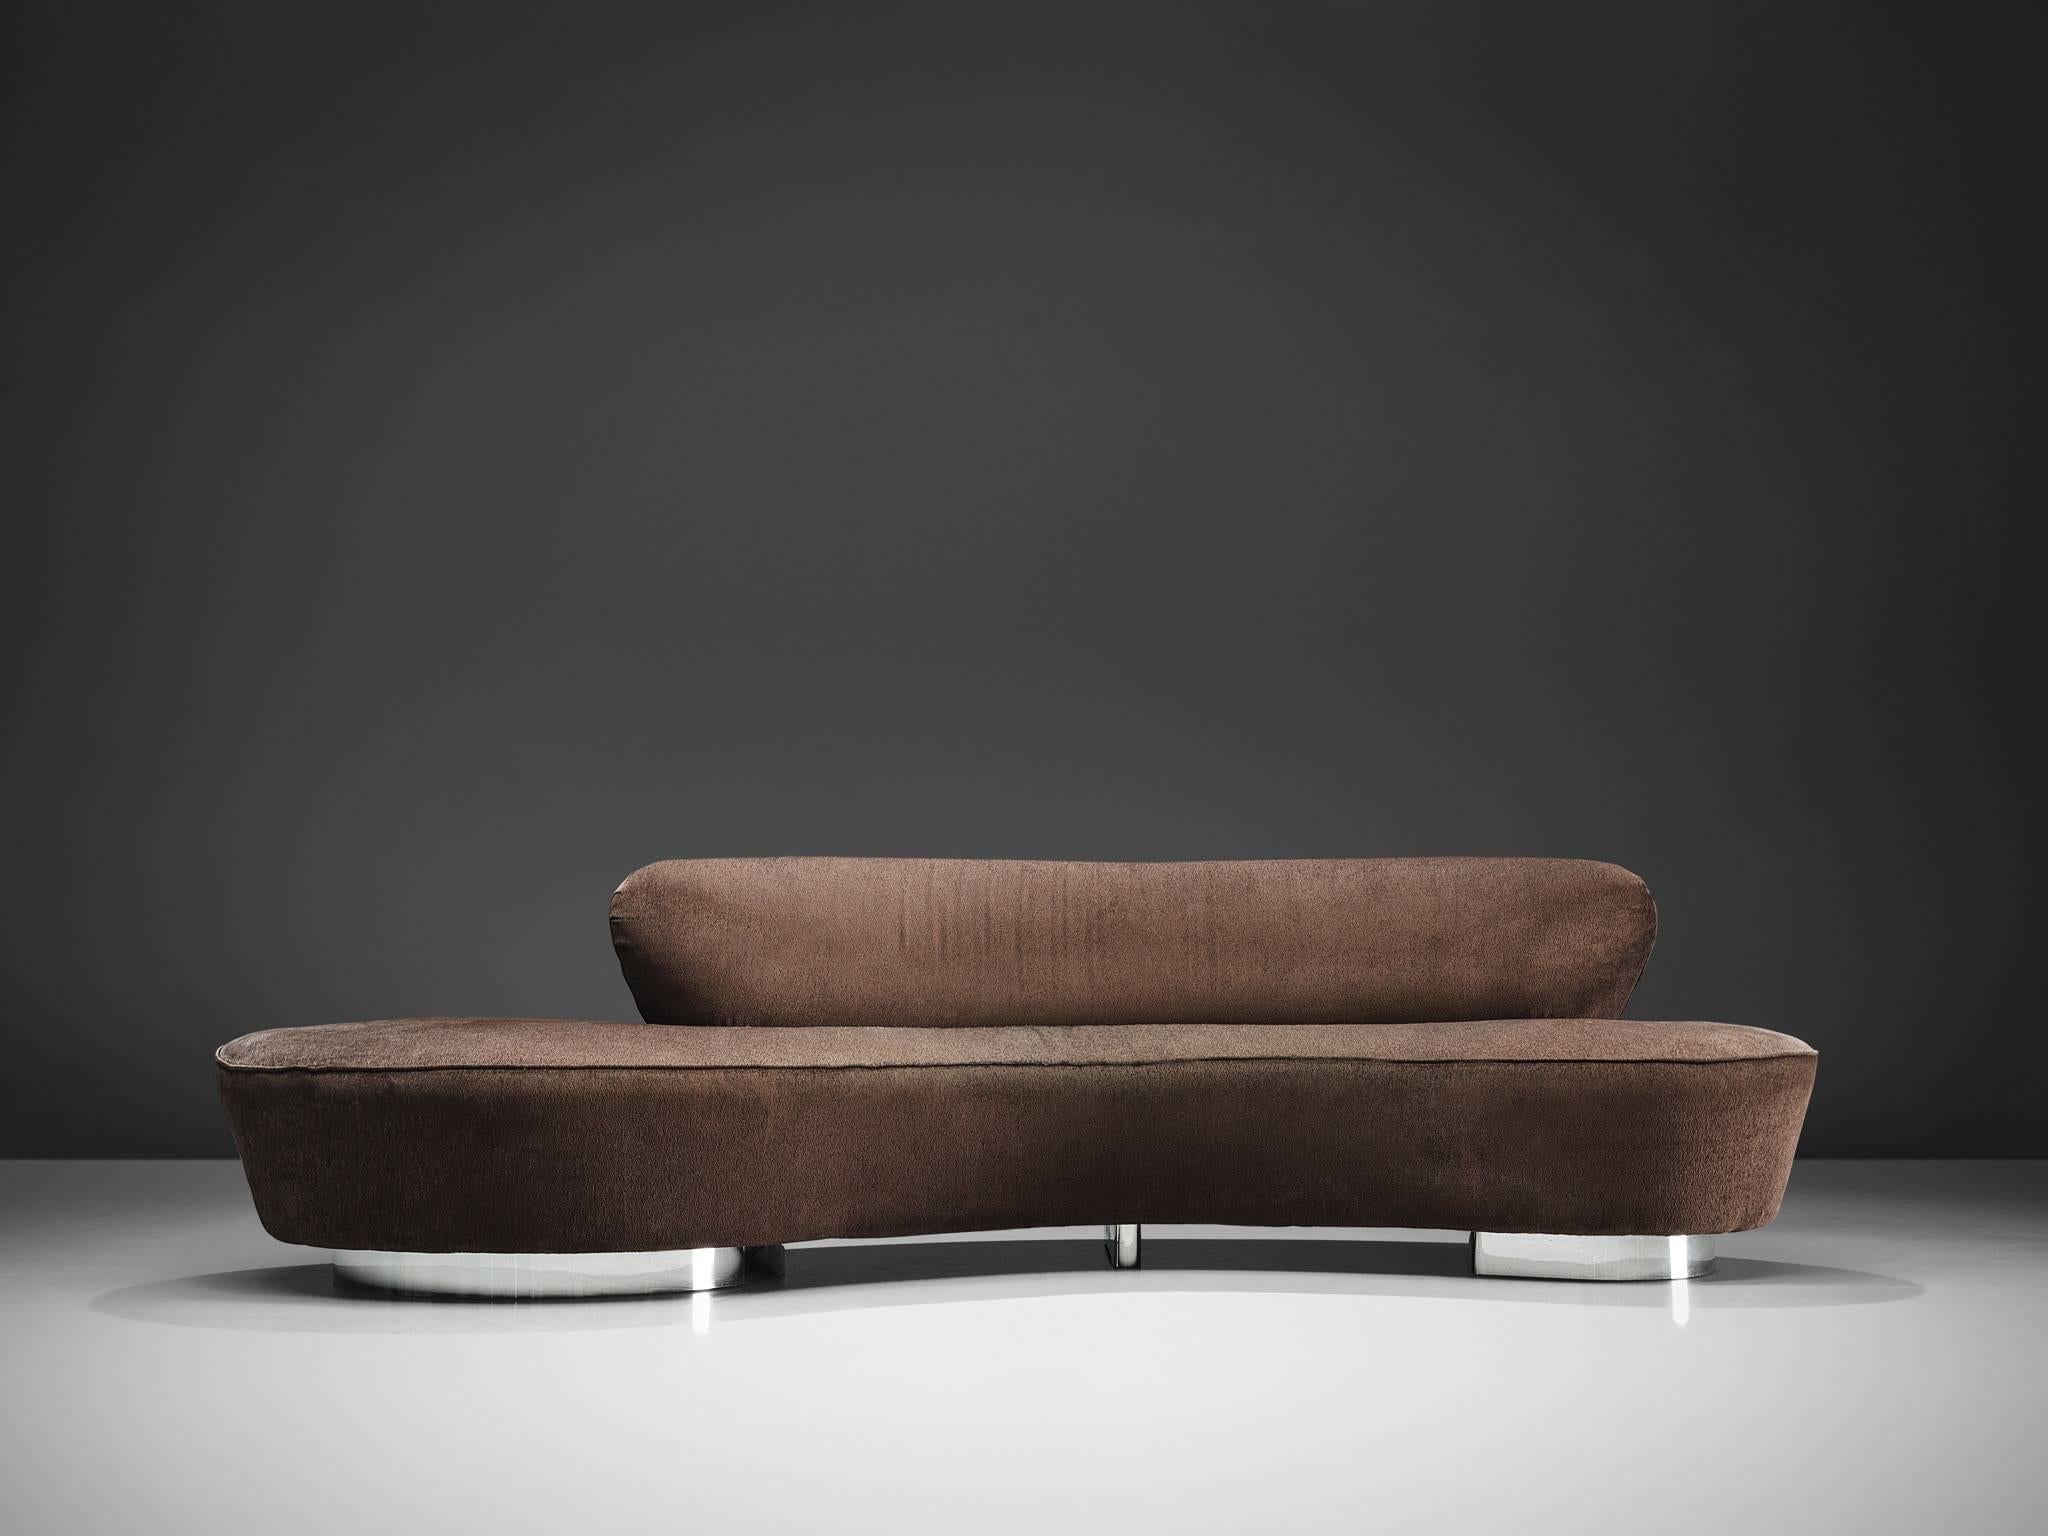 Vladimir Kagan, Serpentine sofa, velvet, chrome, United States, 1960s

This serpentine sofa by Vladimir Kagan is The sofa has a sculptural beauty thanks to its clarity and biomorphic shape. In Kagans own words 'one form leads to the next', meaning